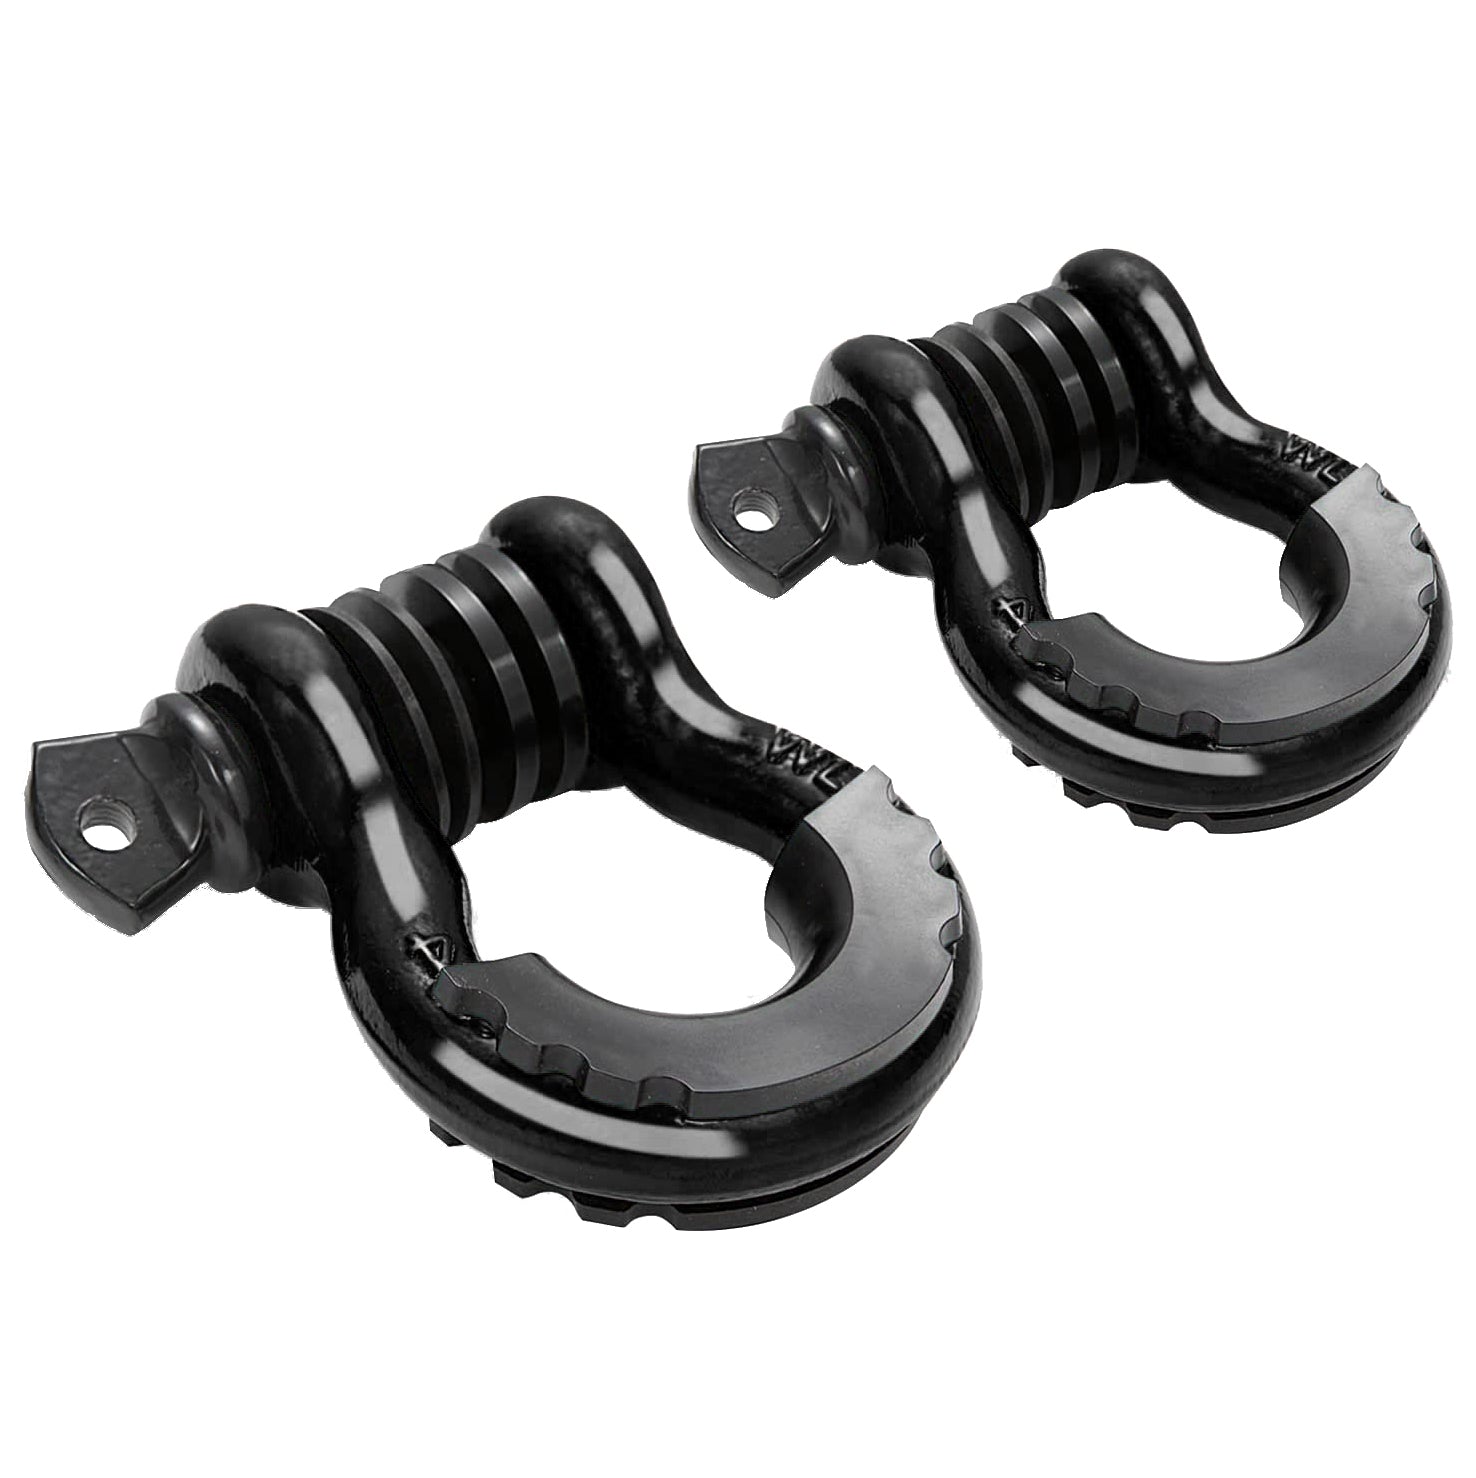 OPENROAD 3/4" D-Ring Shackle 4.75 Ton (9500 Lbs) Capacity with Isolators & Washer Kit for Jeep Truck Vehicle  openroad4wd.com black  